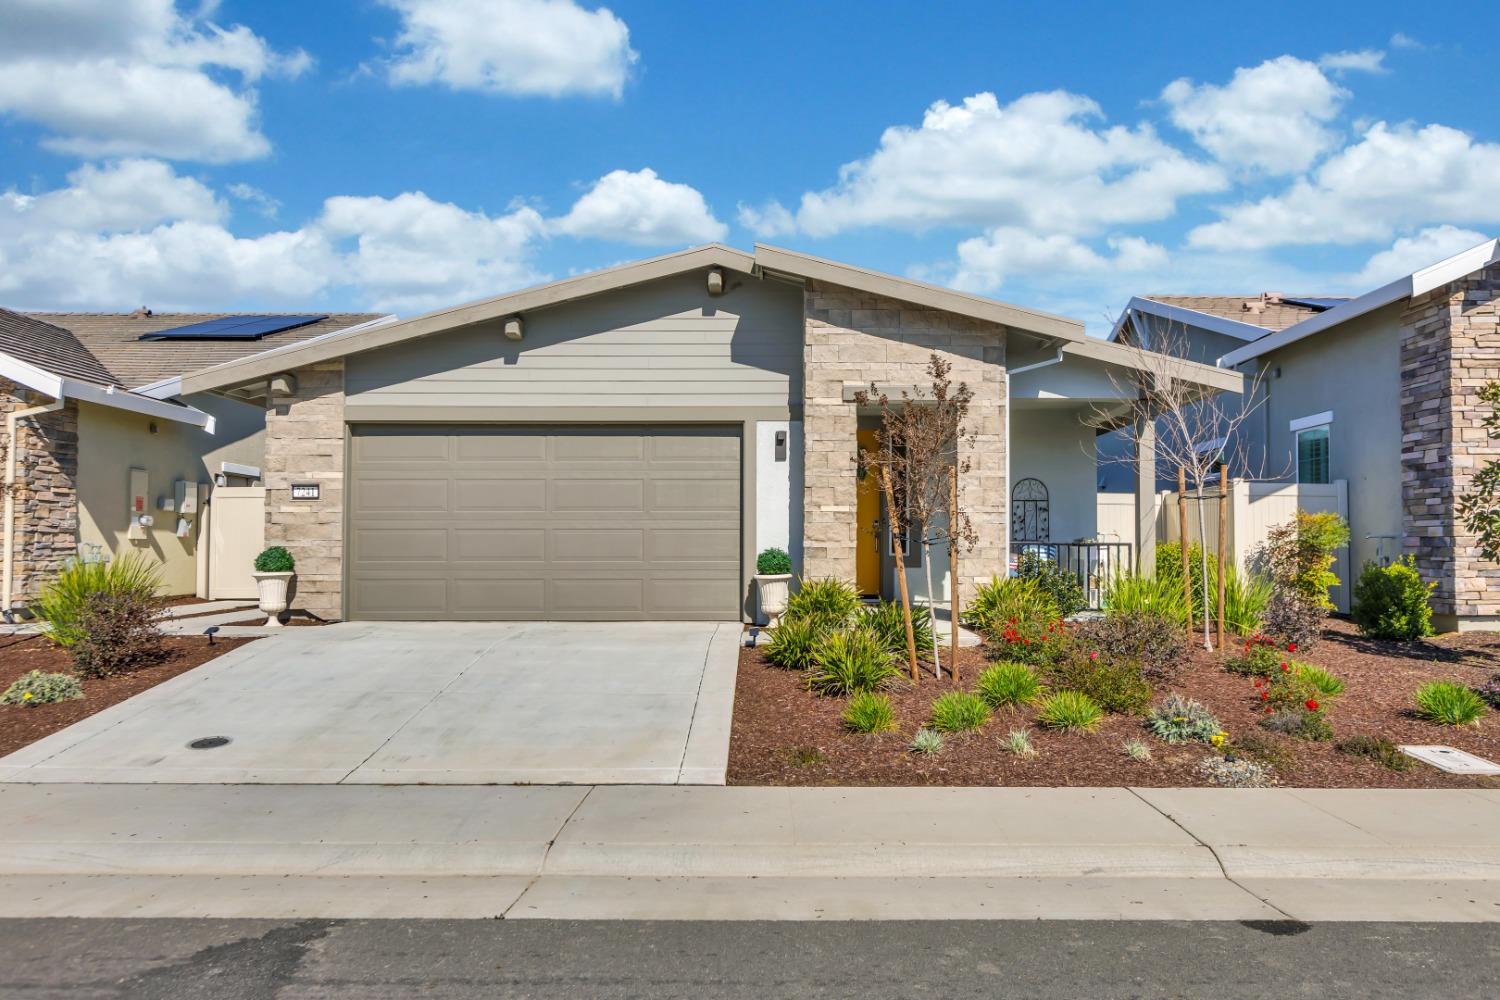 Photo of 7241 Universal Ln in Roseville, CA